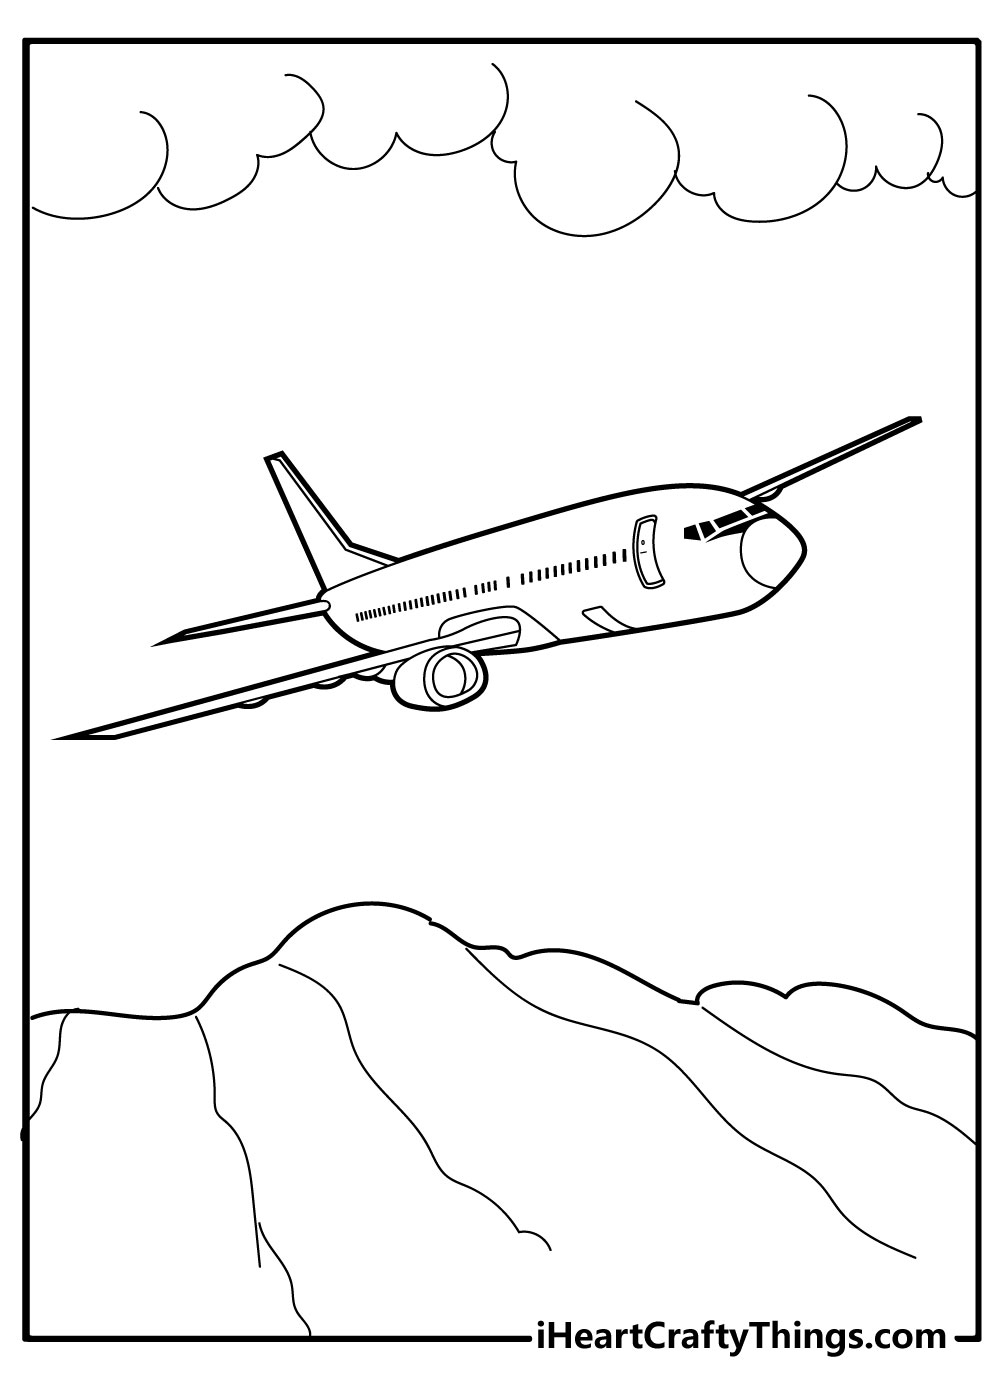 Airplane Coloring Pages free pdf for kids